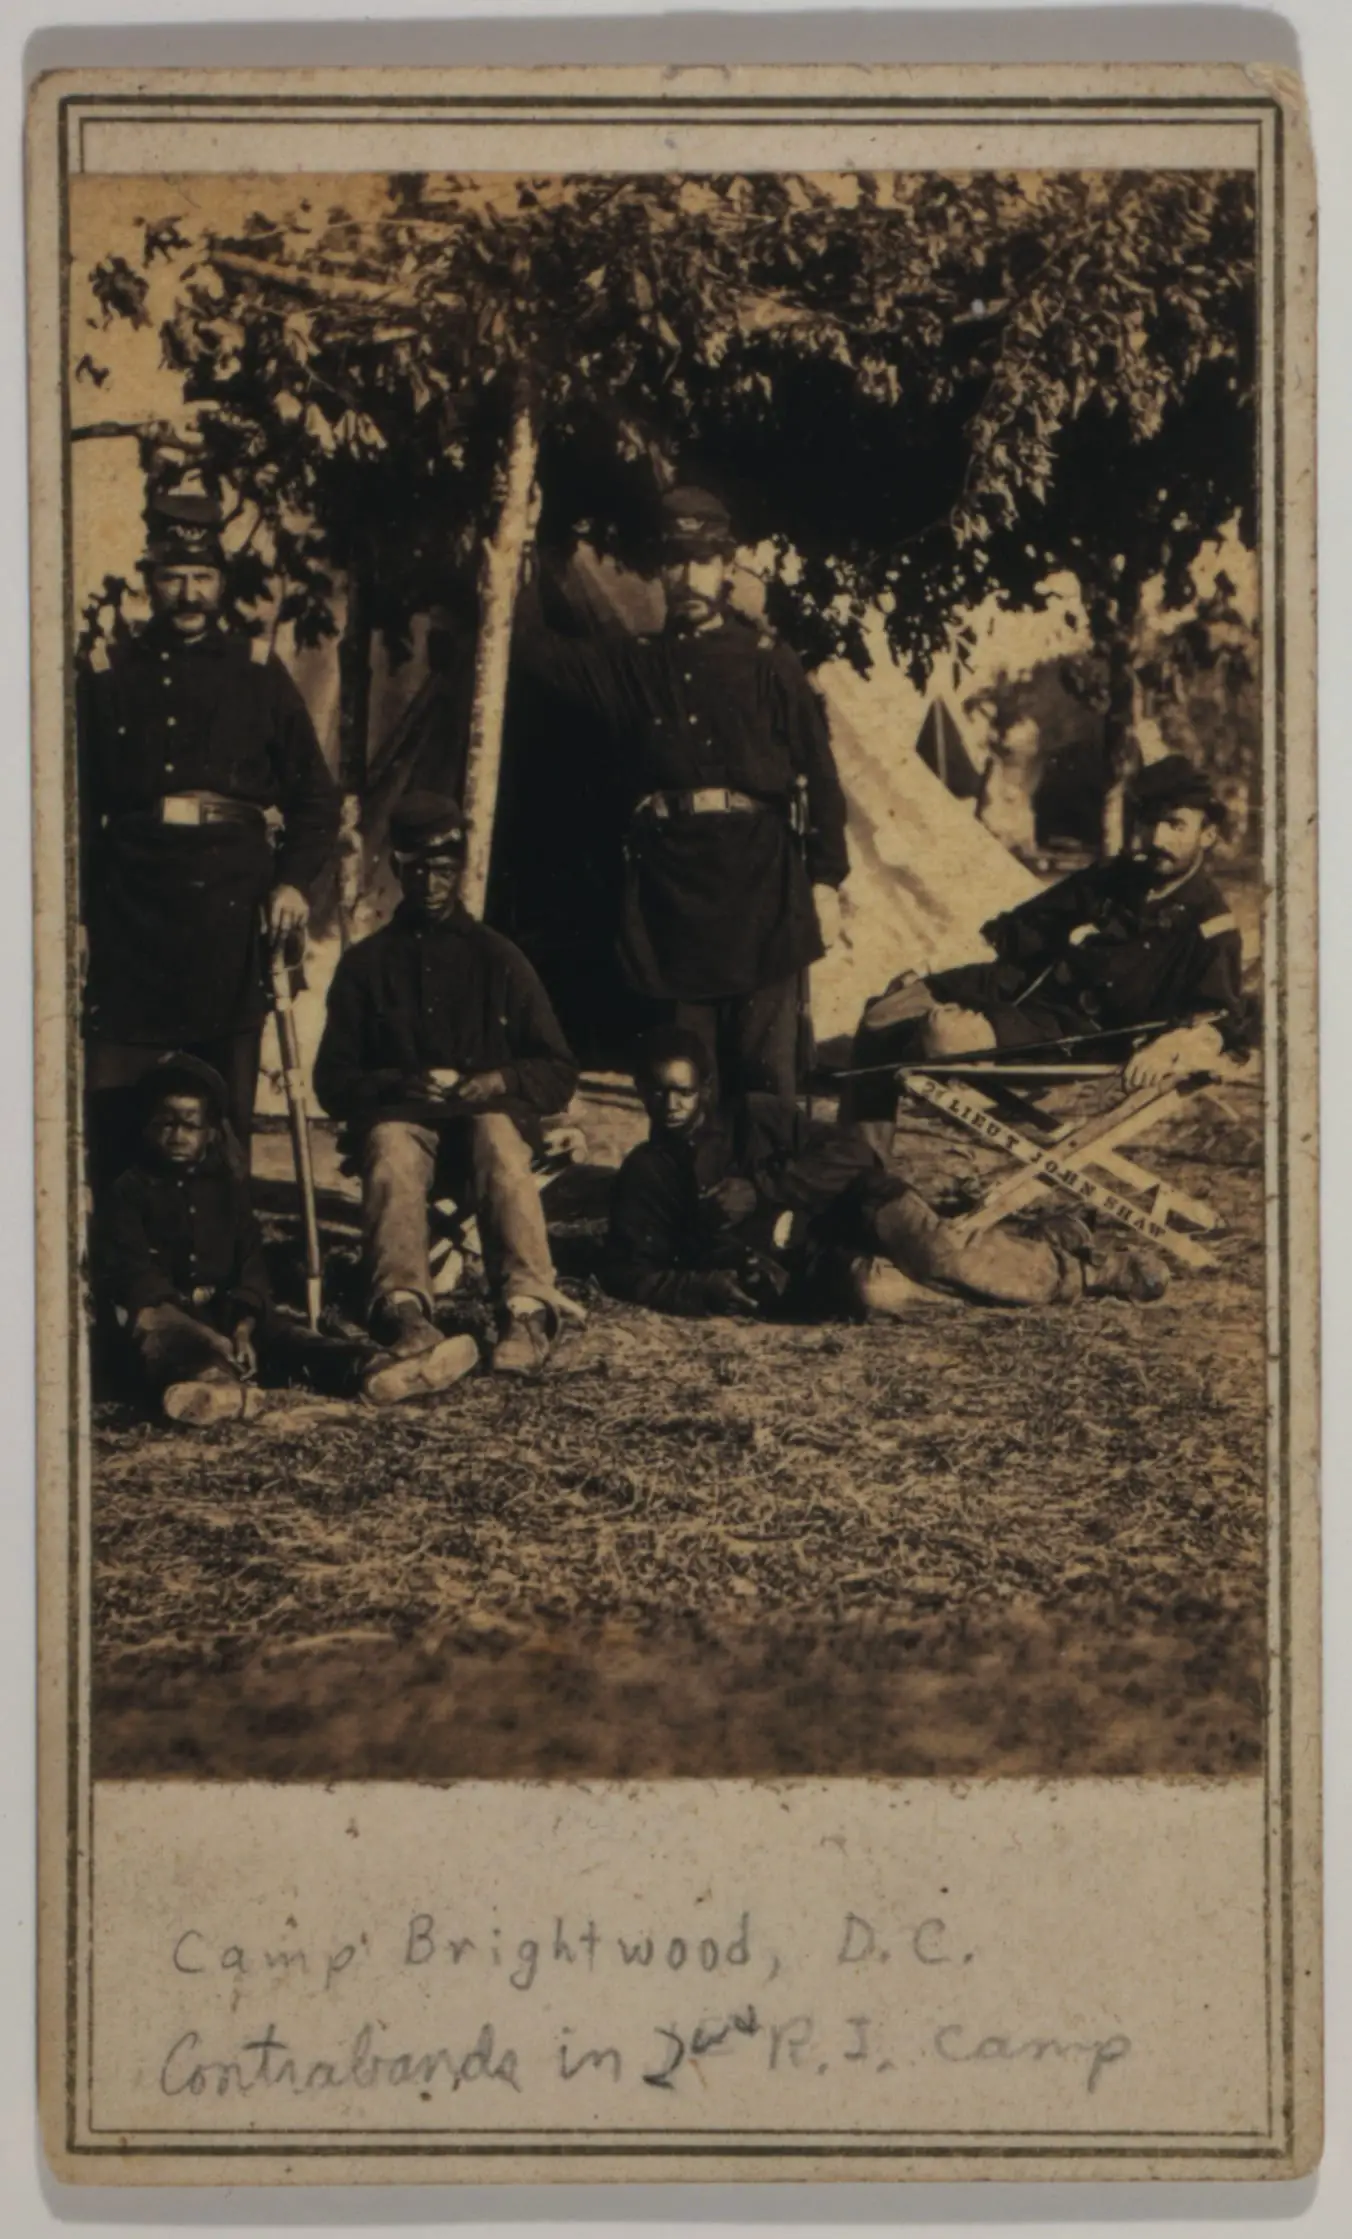 Capt. B.S. Brown (left); Lt. John P. Shaw, Co. F 2nd Regt. Rhode Island Volunteer Infantry (center); and Lt. Fry (right) with African American men and boy.